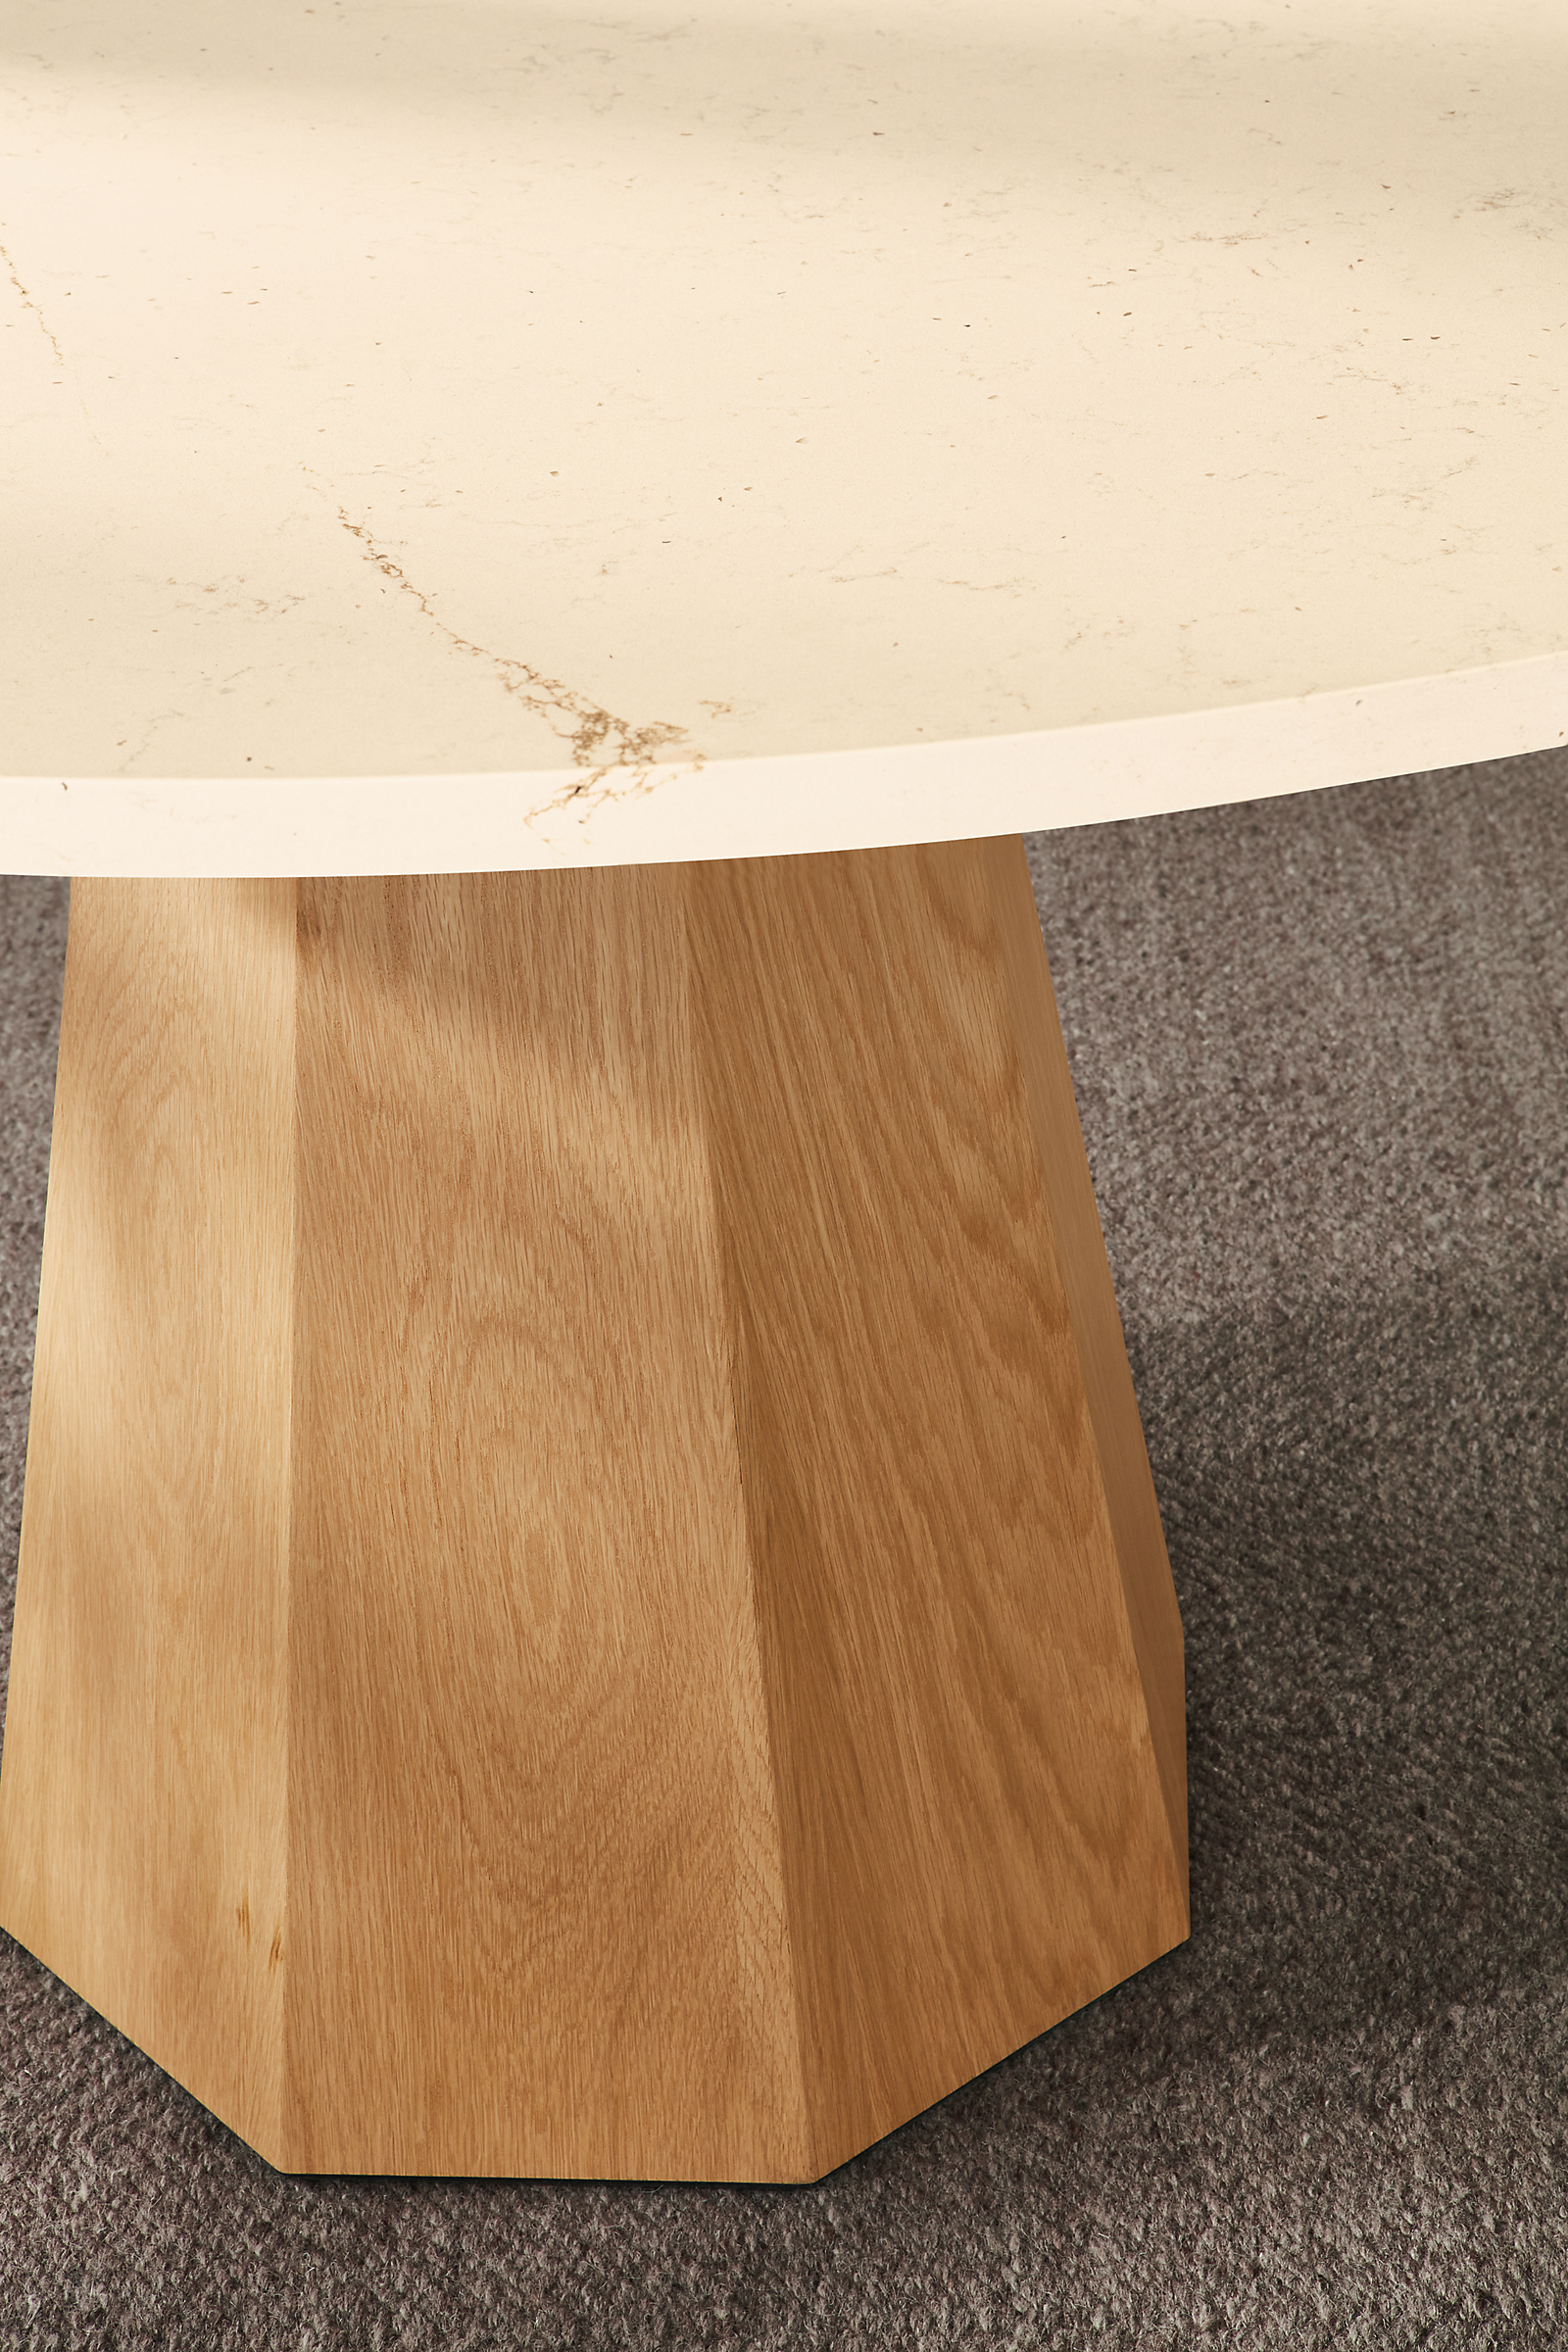 Detail of Glover 48 diameter round table in white oak with ecru quartz top and Avilia 8 by 10 rug in foxhound.